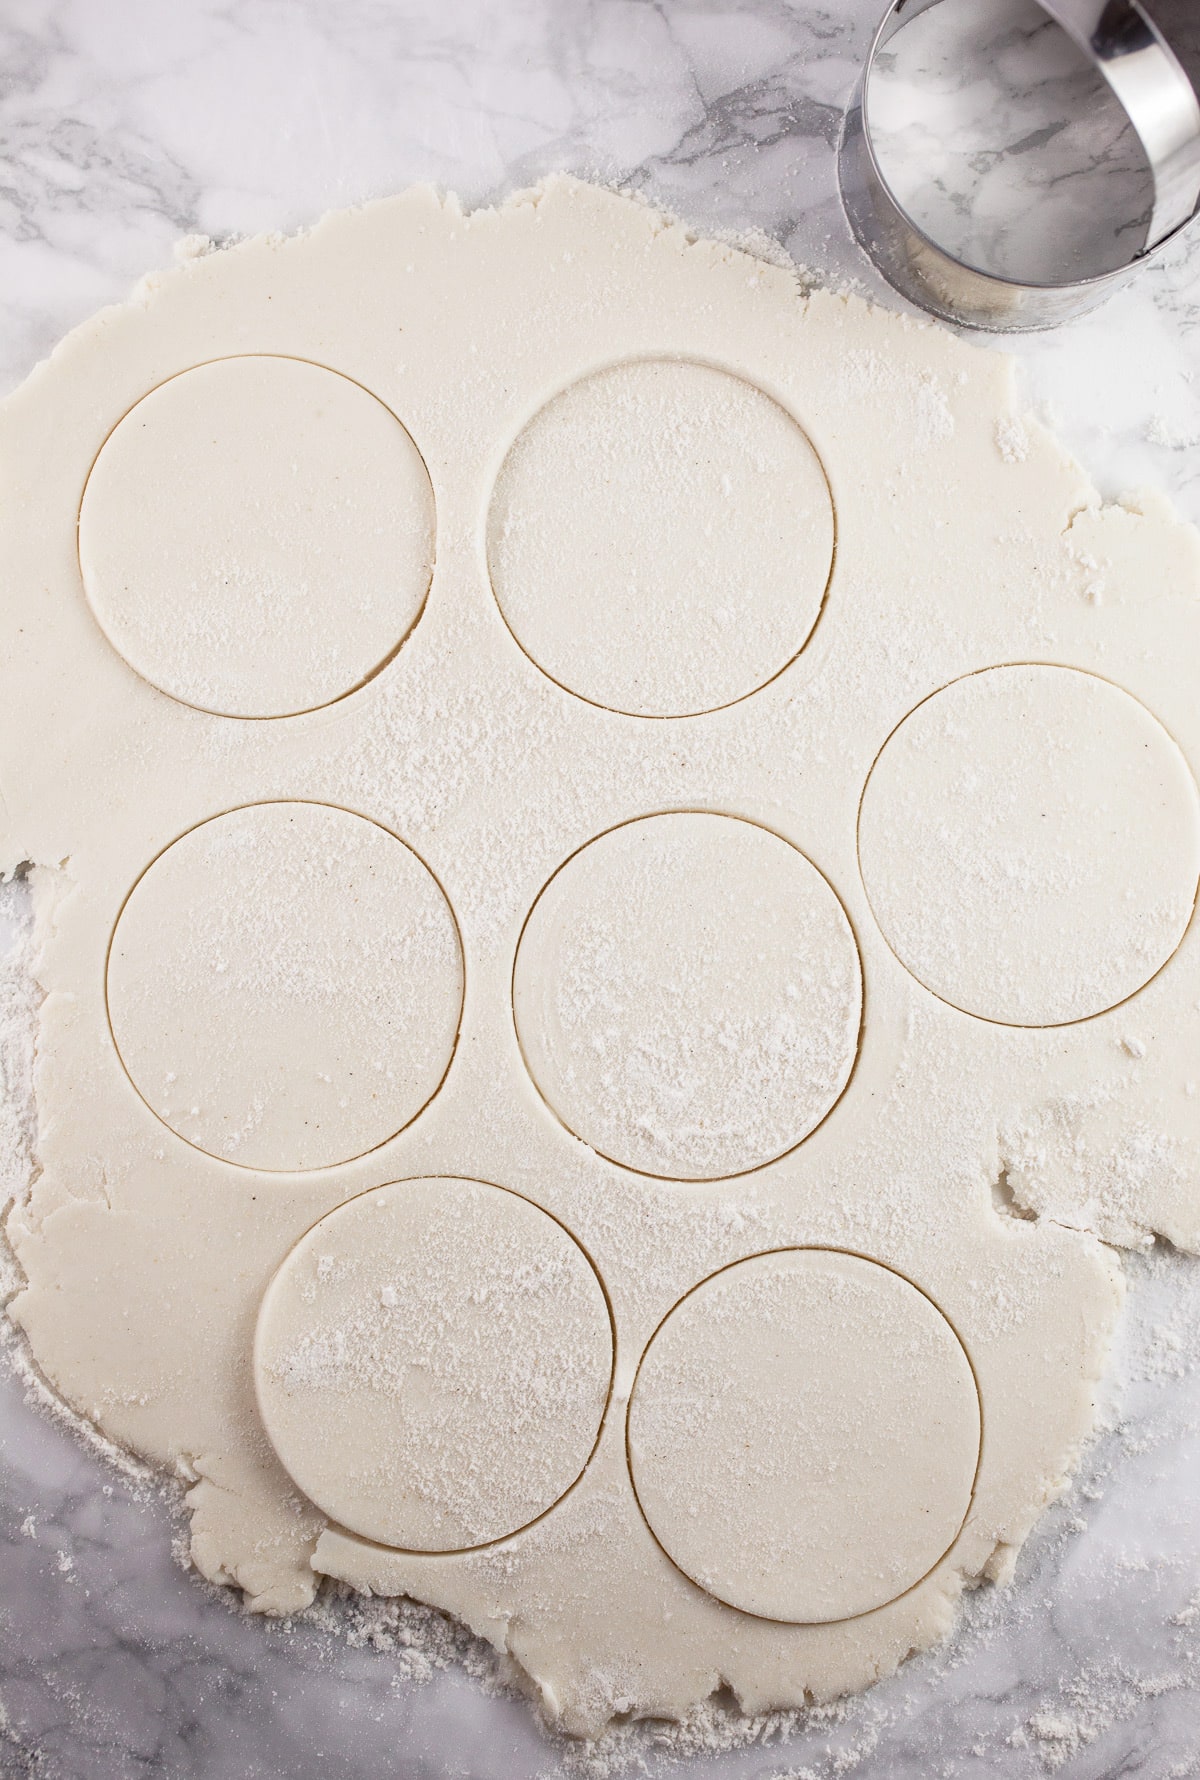 Gluten free puff pastry sheet cut into rounds with biscuit cutter.